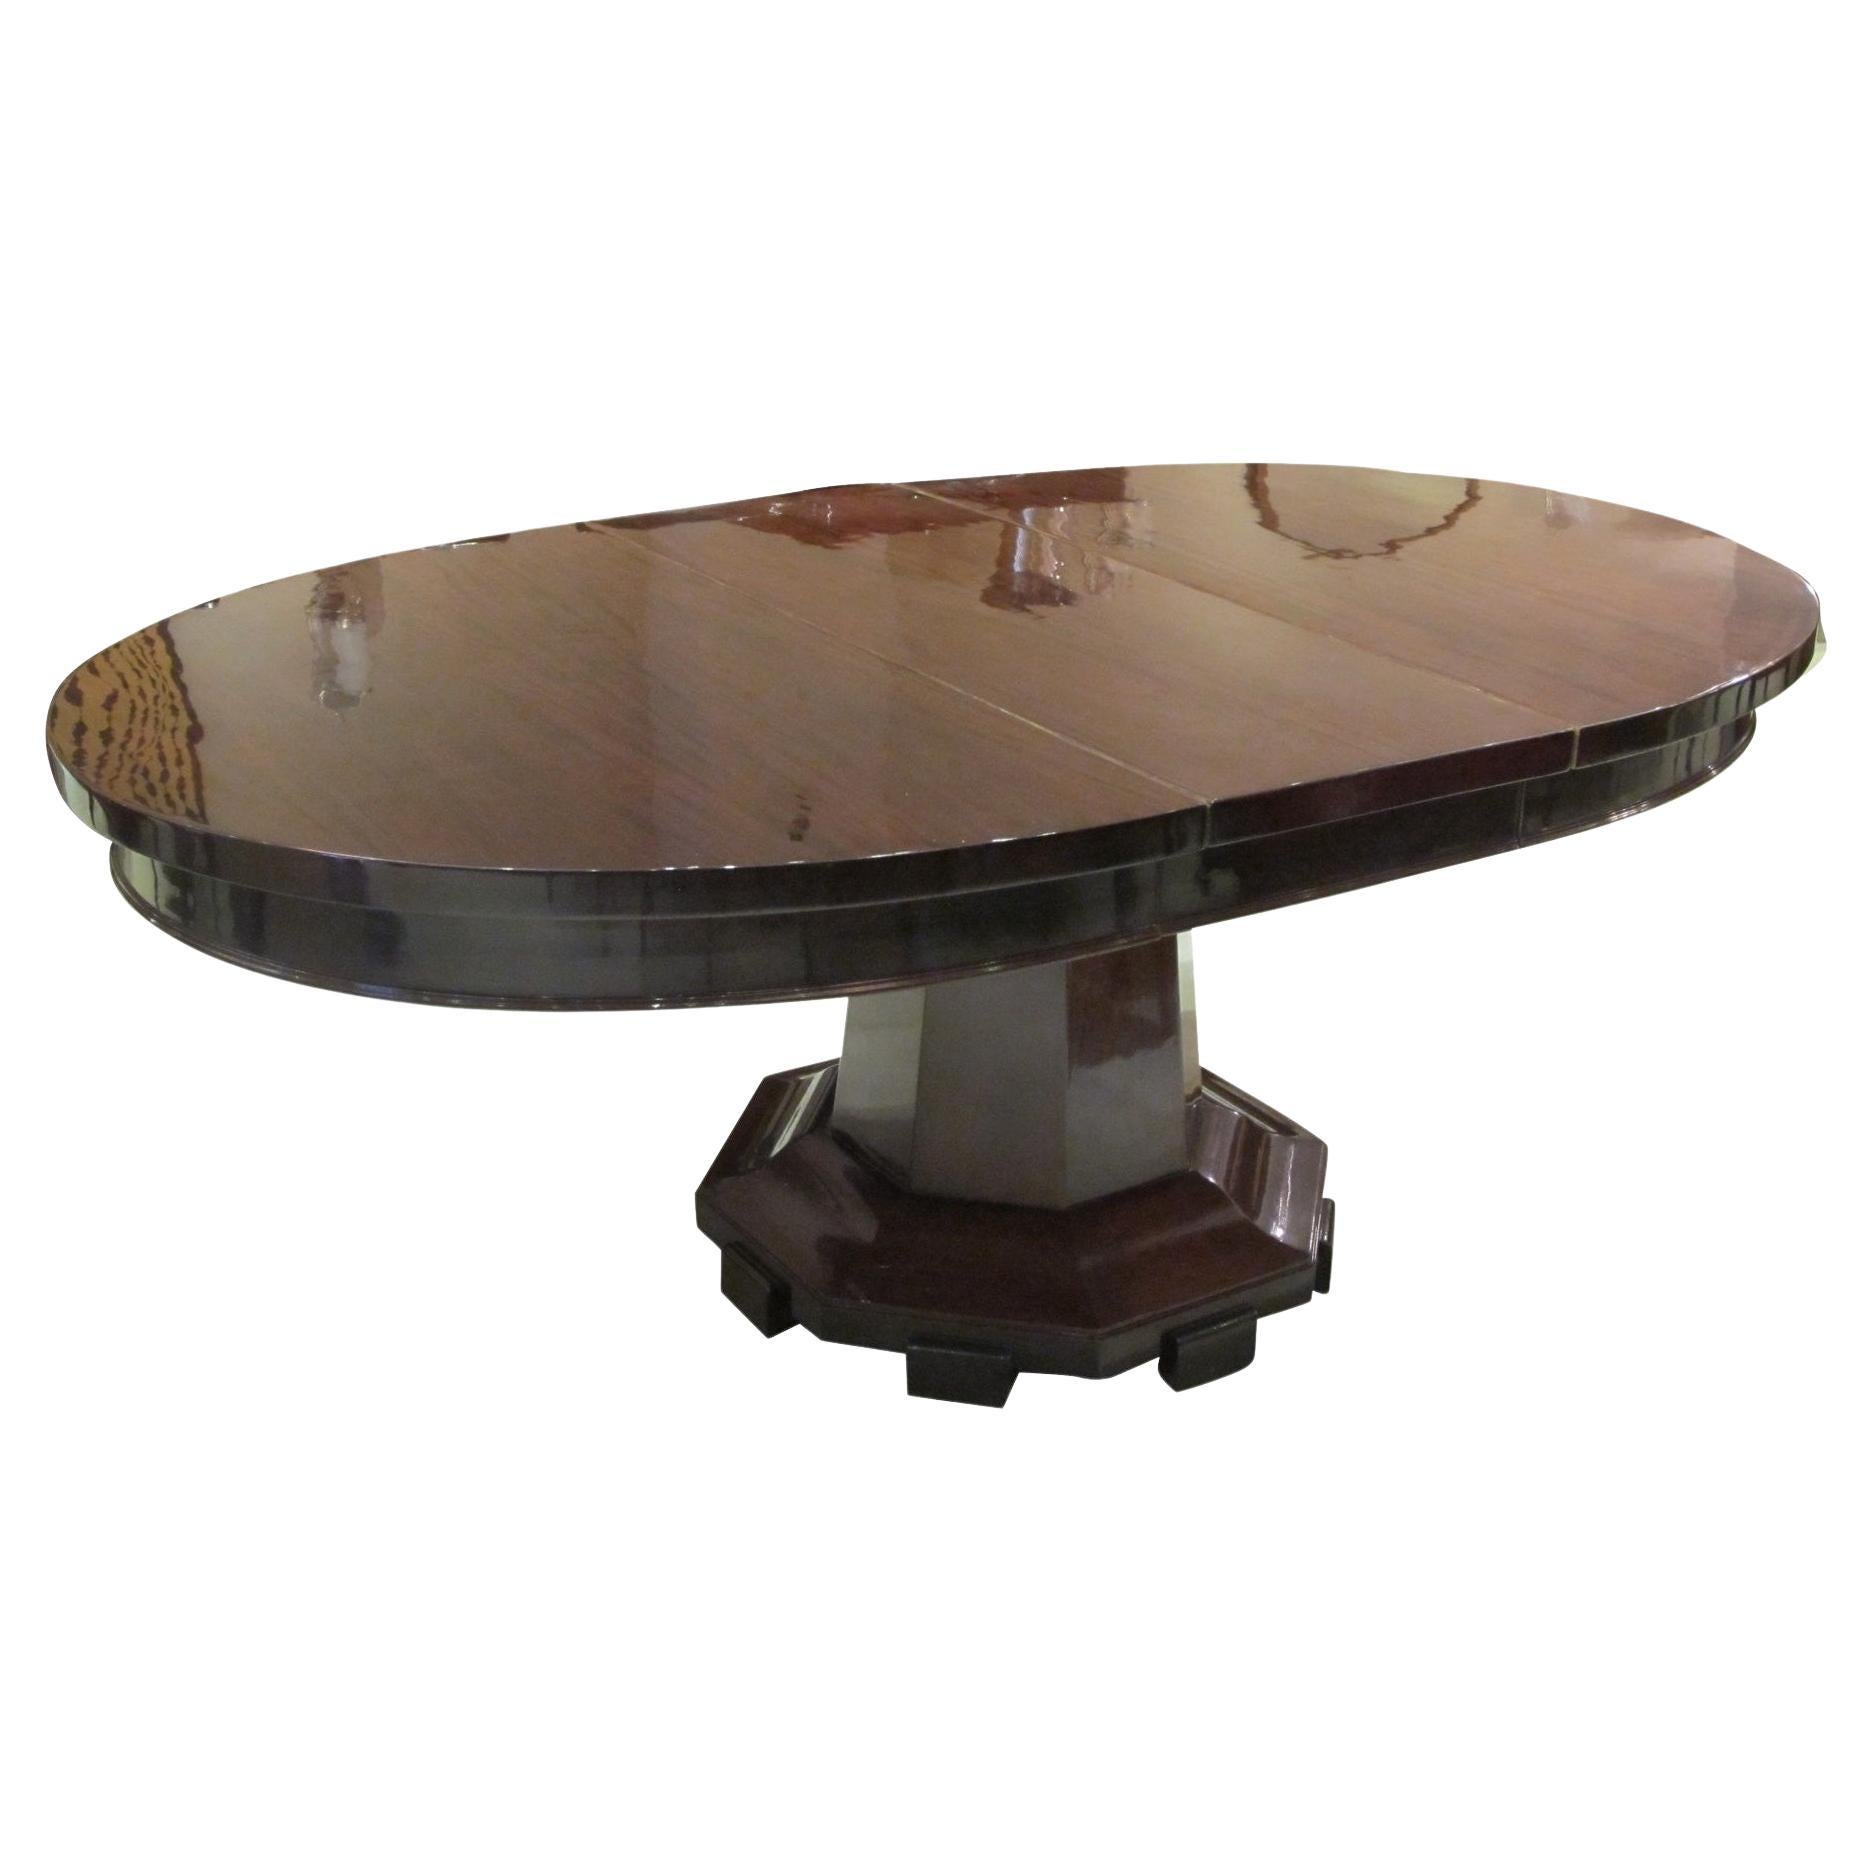 Dining Room Table, Style: Art Deco, France 1920, '8 People', Material: Wood